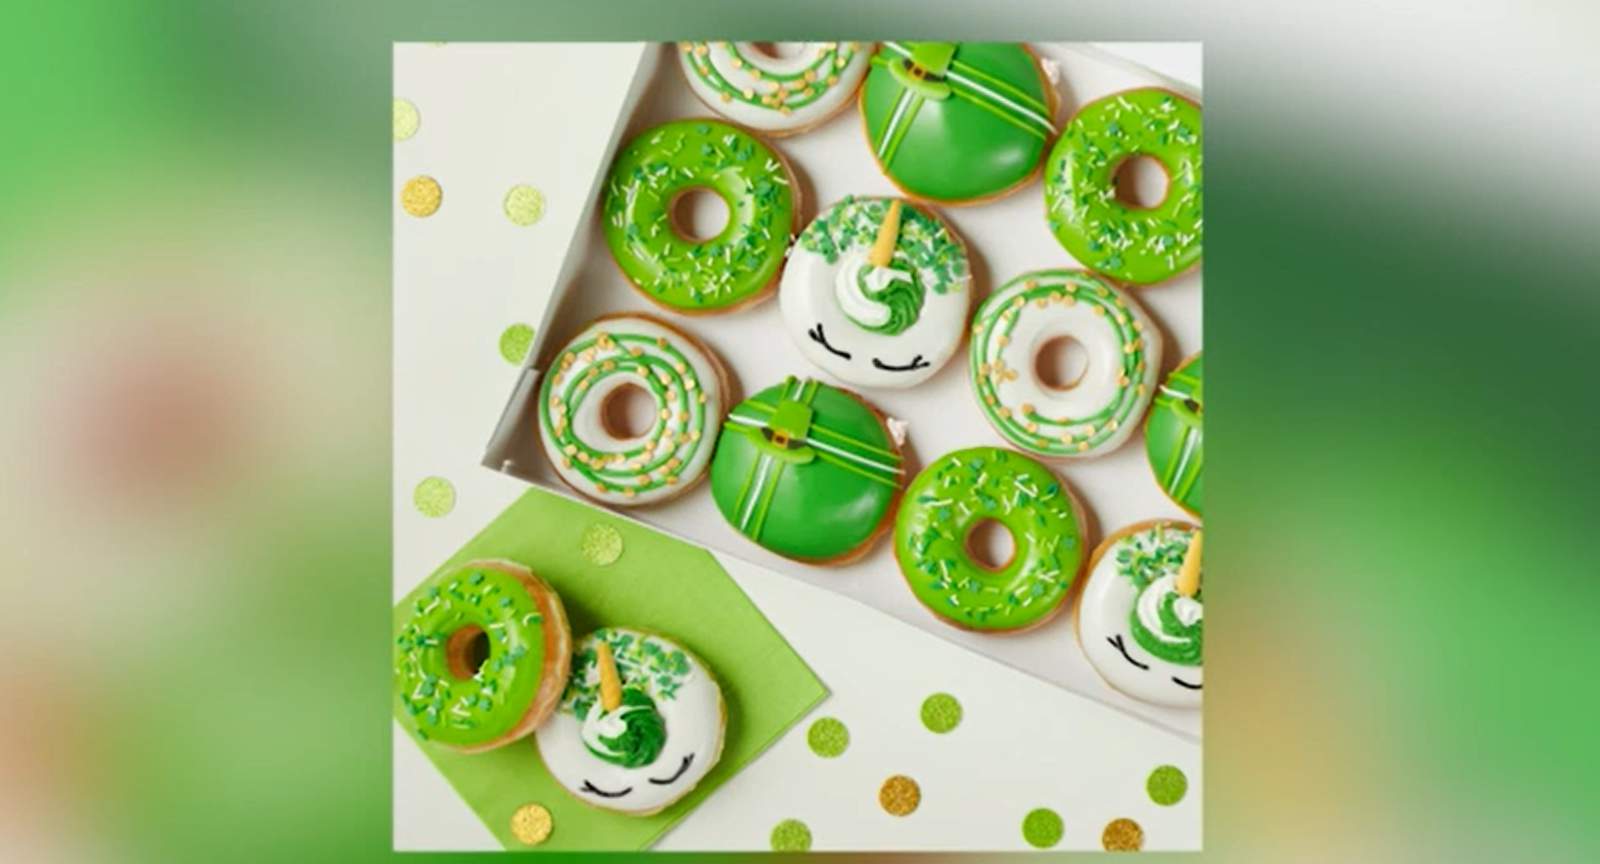 Green treats to try with the family this St. Patrick’s Day